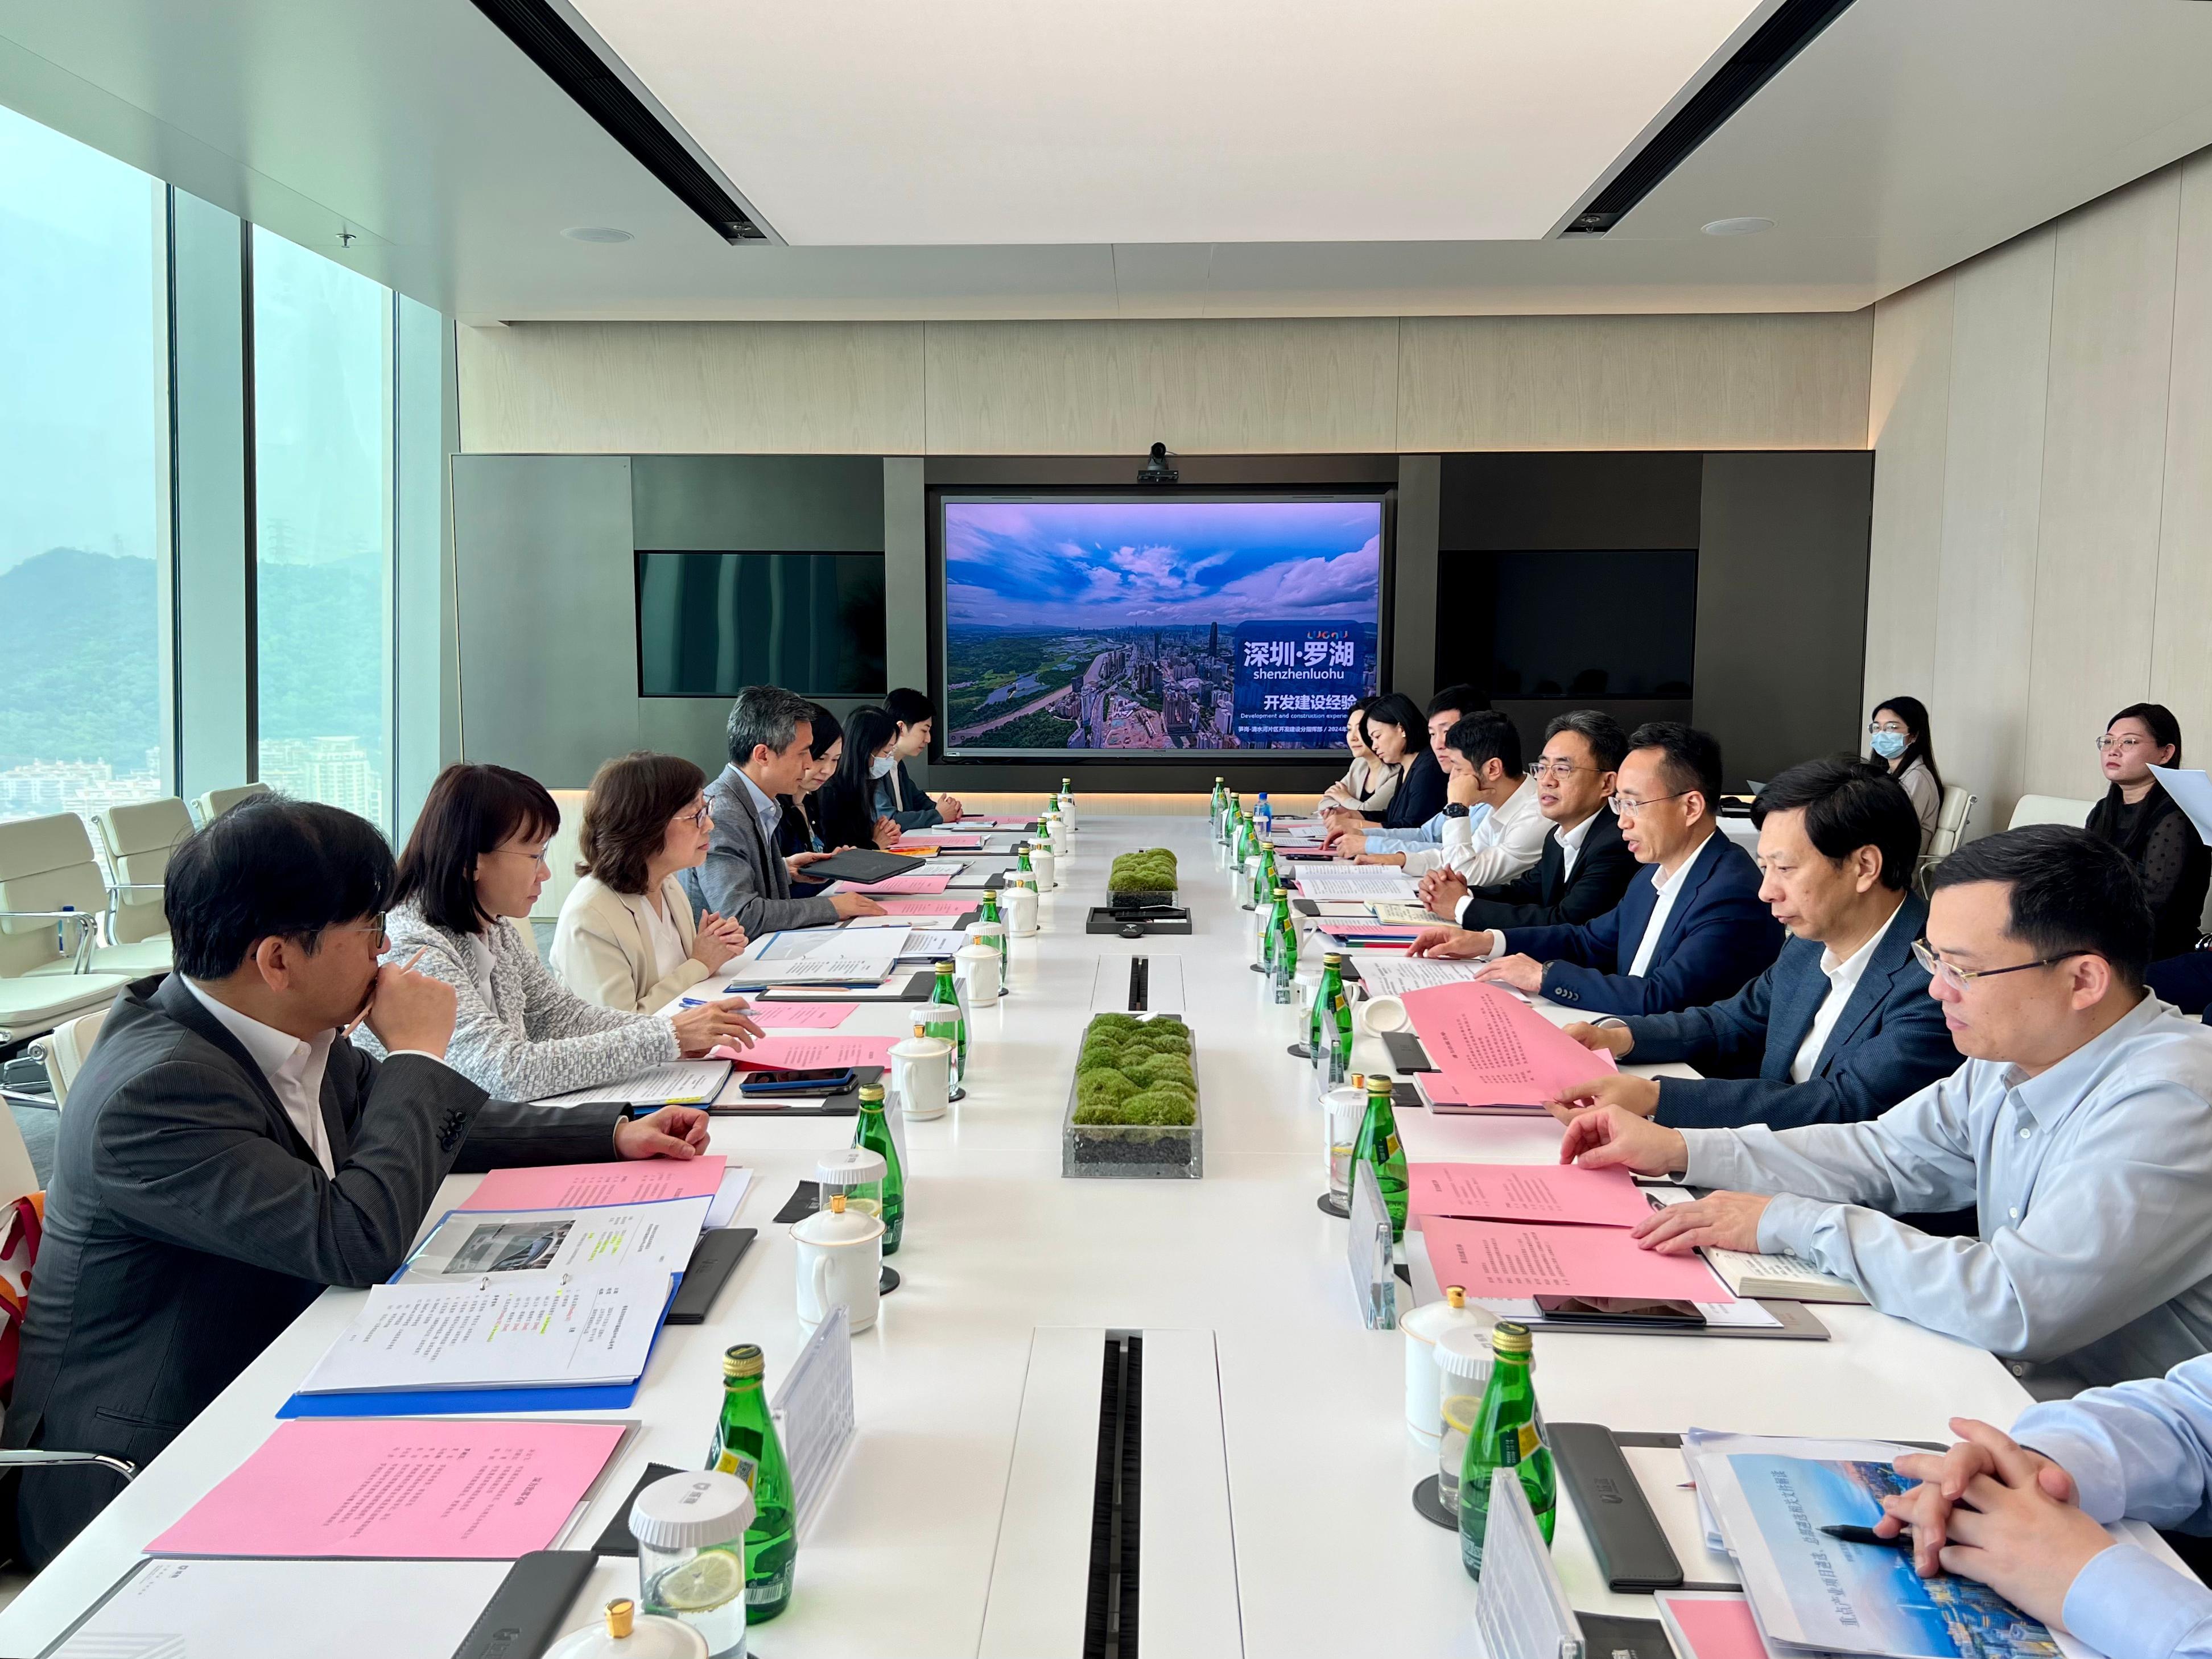 The Secretary for Development, Ms Bernadette Linn, and the Director of the Northern Metropolis Co-ordination Office, Mr Vic Yau, today (March 28) visited Luohu District and Pingshan District of Shenzhen. Photo shows Ms Linn (third left) and Mr Yau (fourth left) exchanging views with officials of relevant authorities of Shenzhen and Luohu District on the development of local districts and urban renewal.